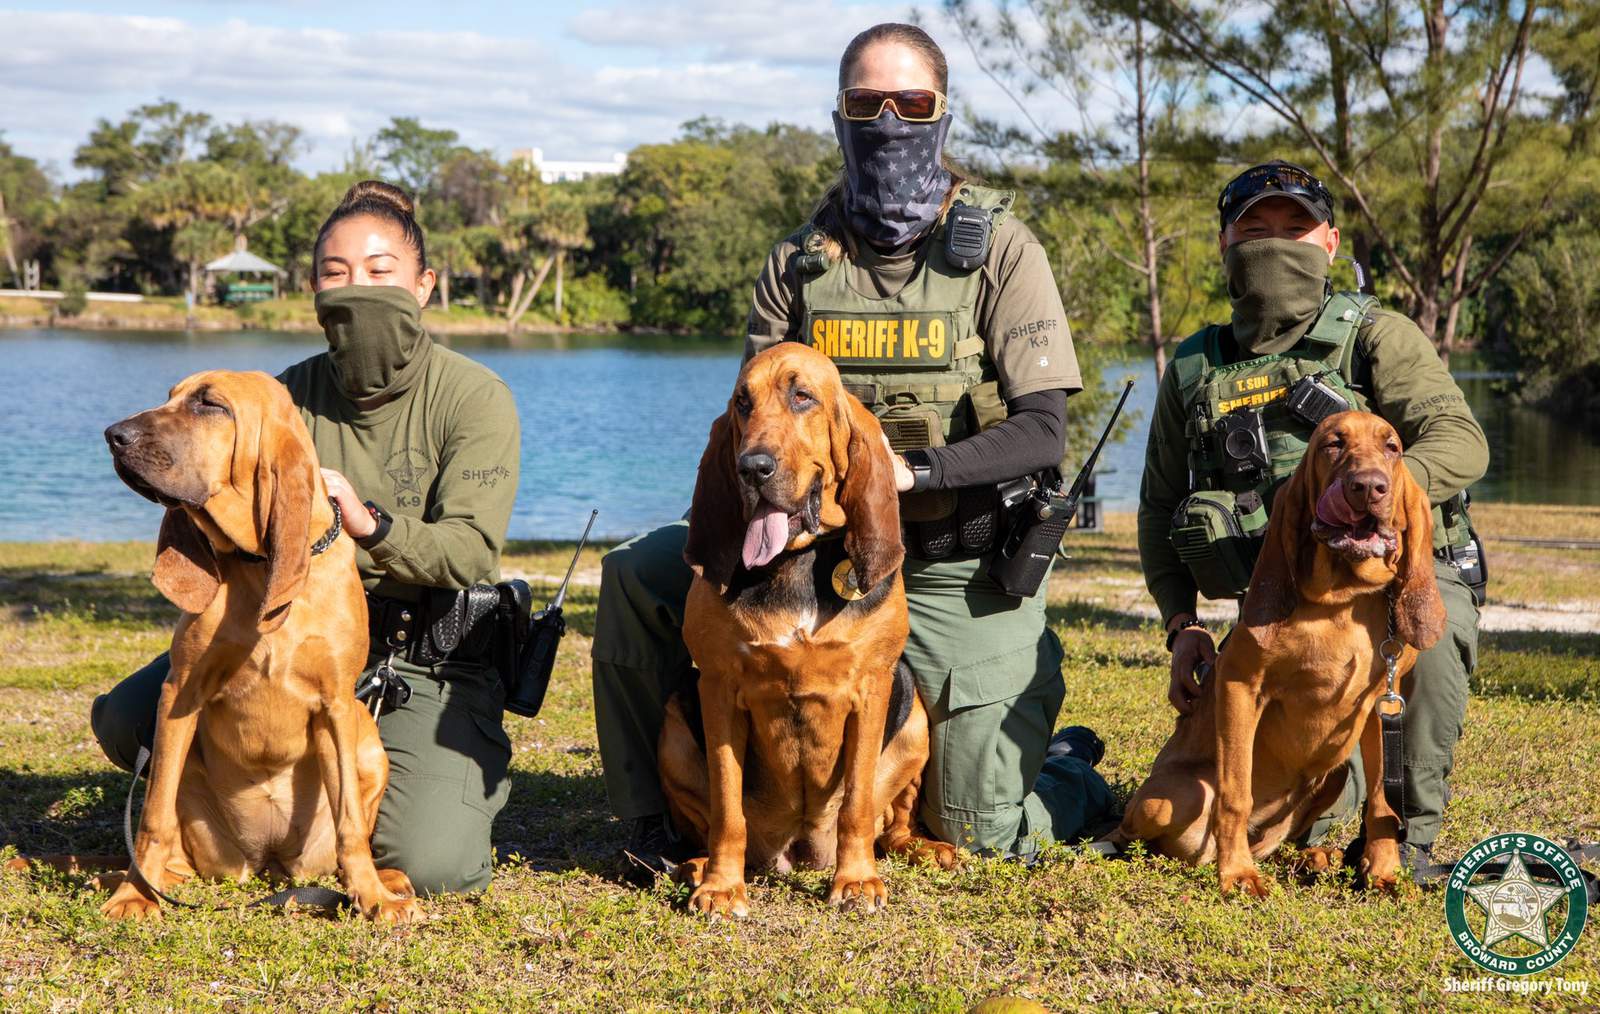 Two bloodhounds join Broward Sheriff’s Office to help paw-trol county